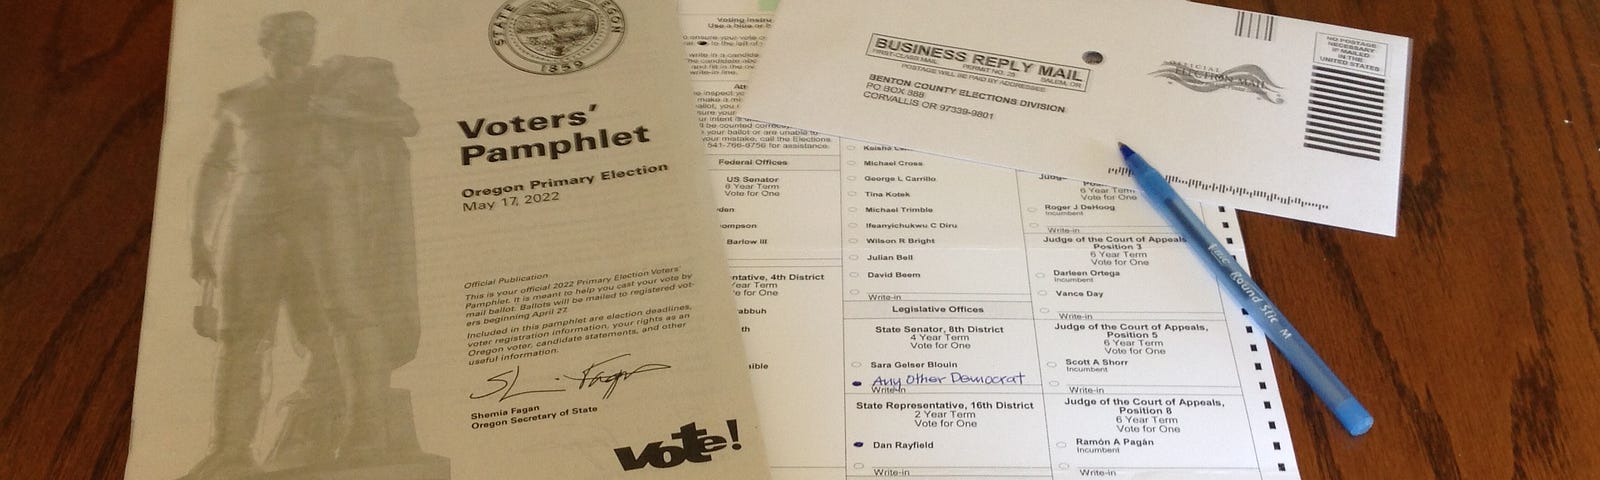 Photo shows a ballot, voter’s pamphlet, ebvelop and pen on a dining room table.